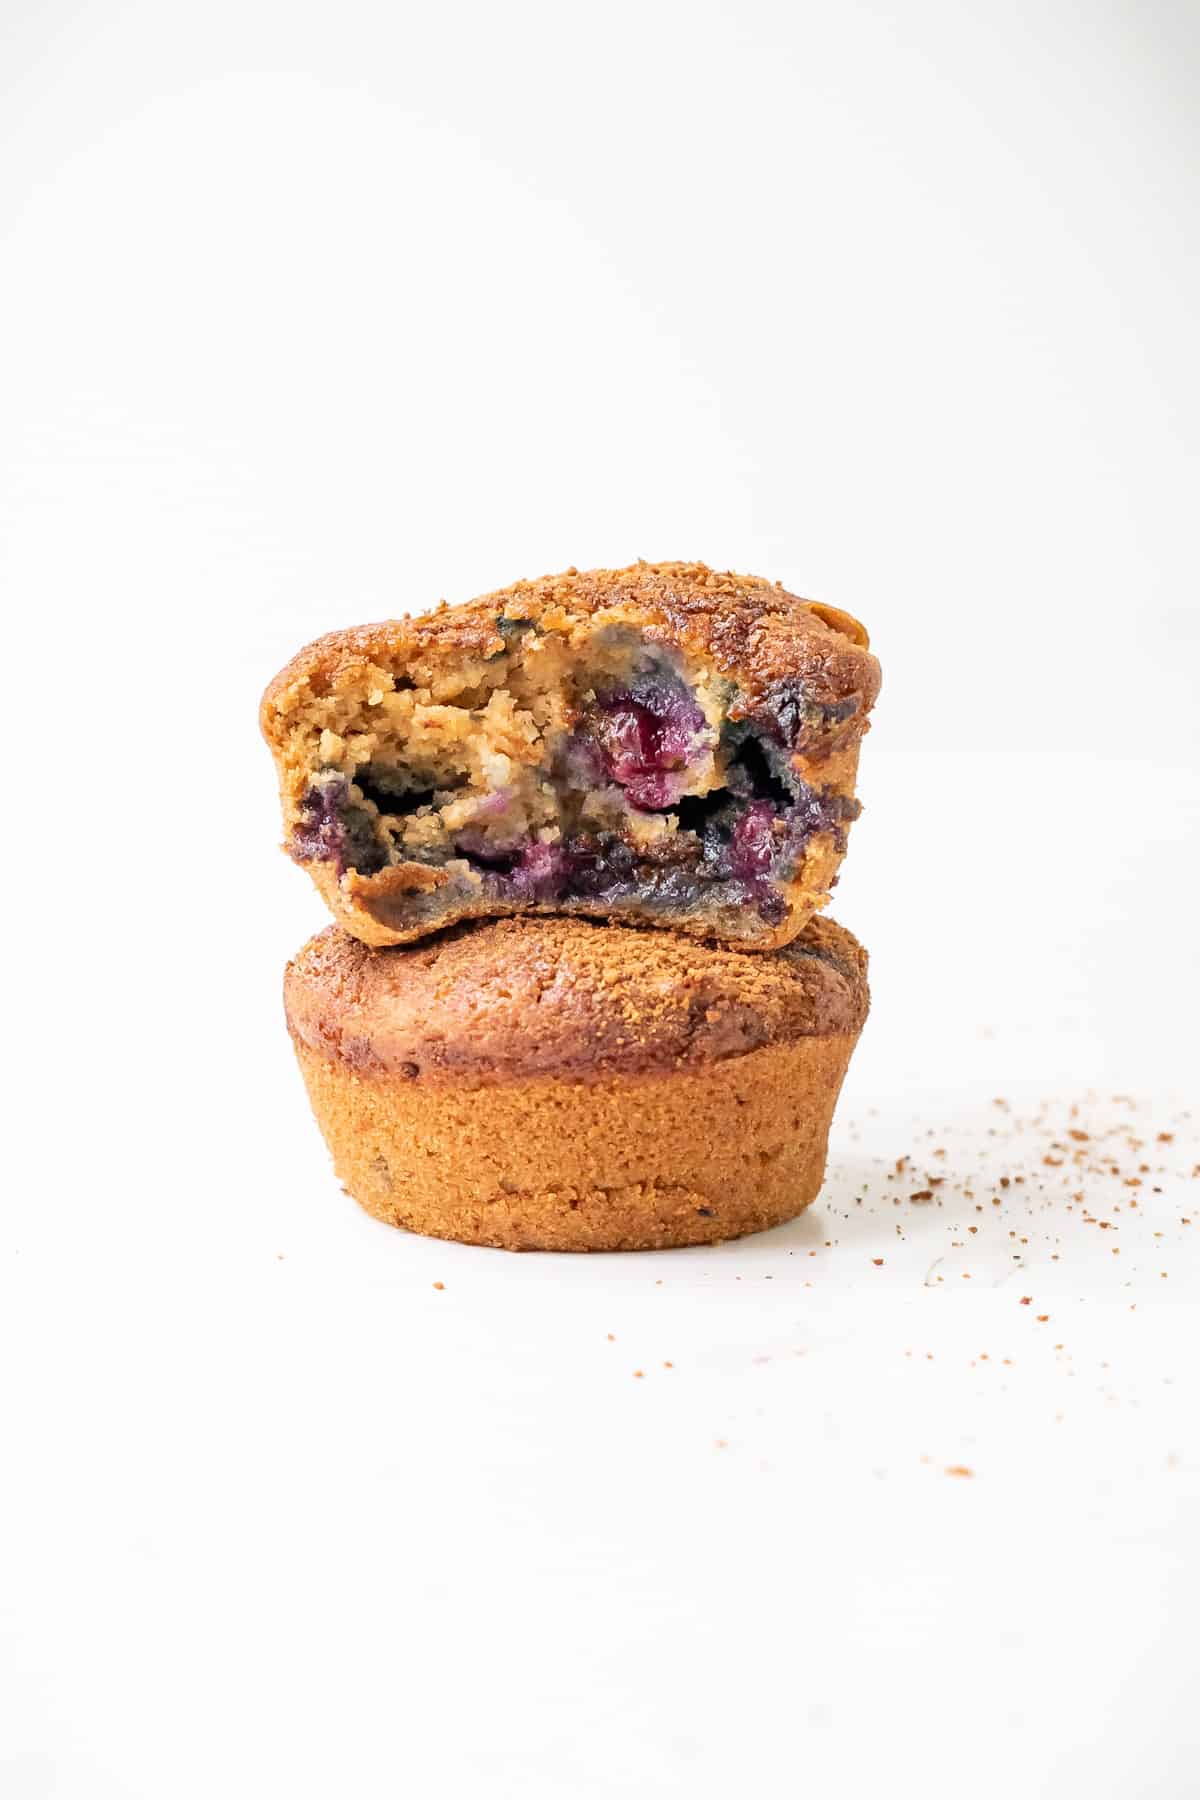 Two stacked gluten free blueberry muffins with a bite taken out of the top one to show a fluffy texture and tons of blueberries!